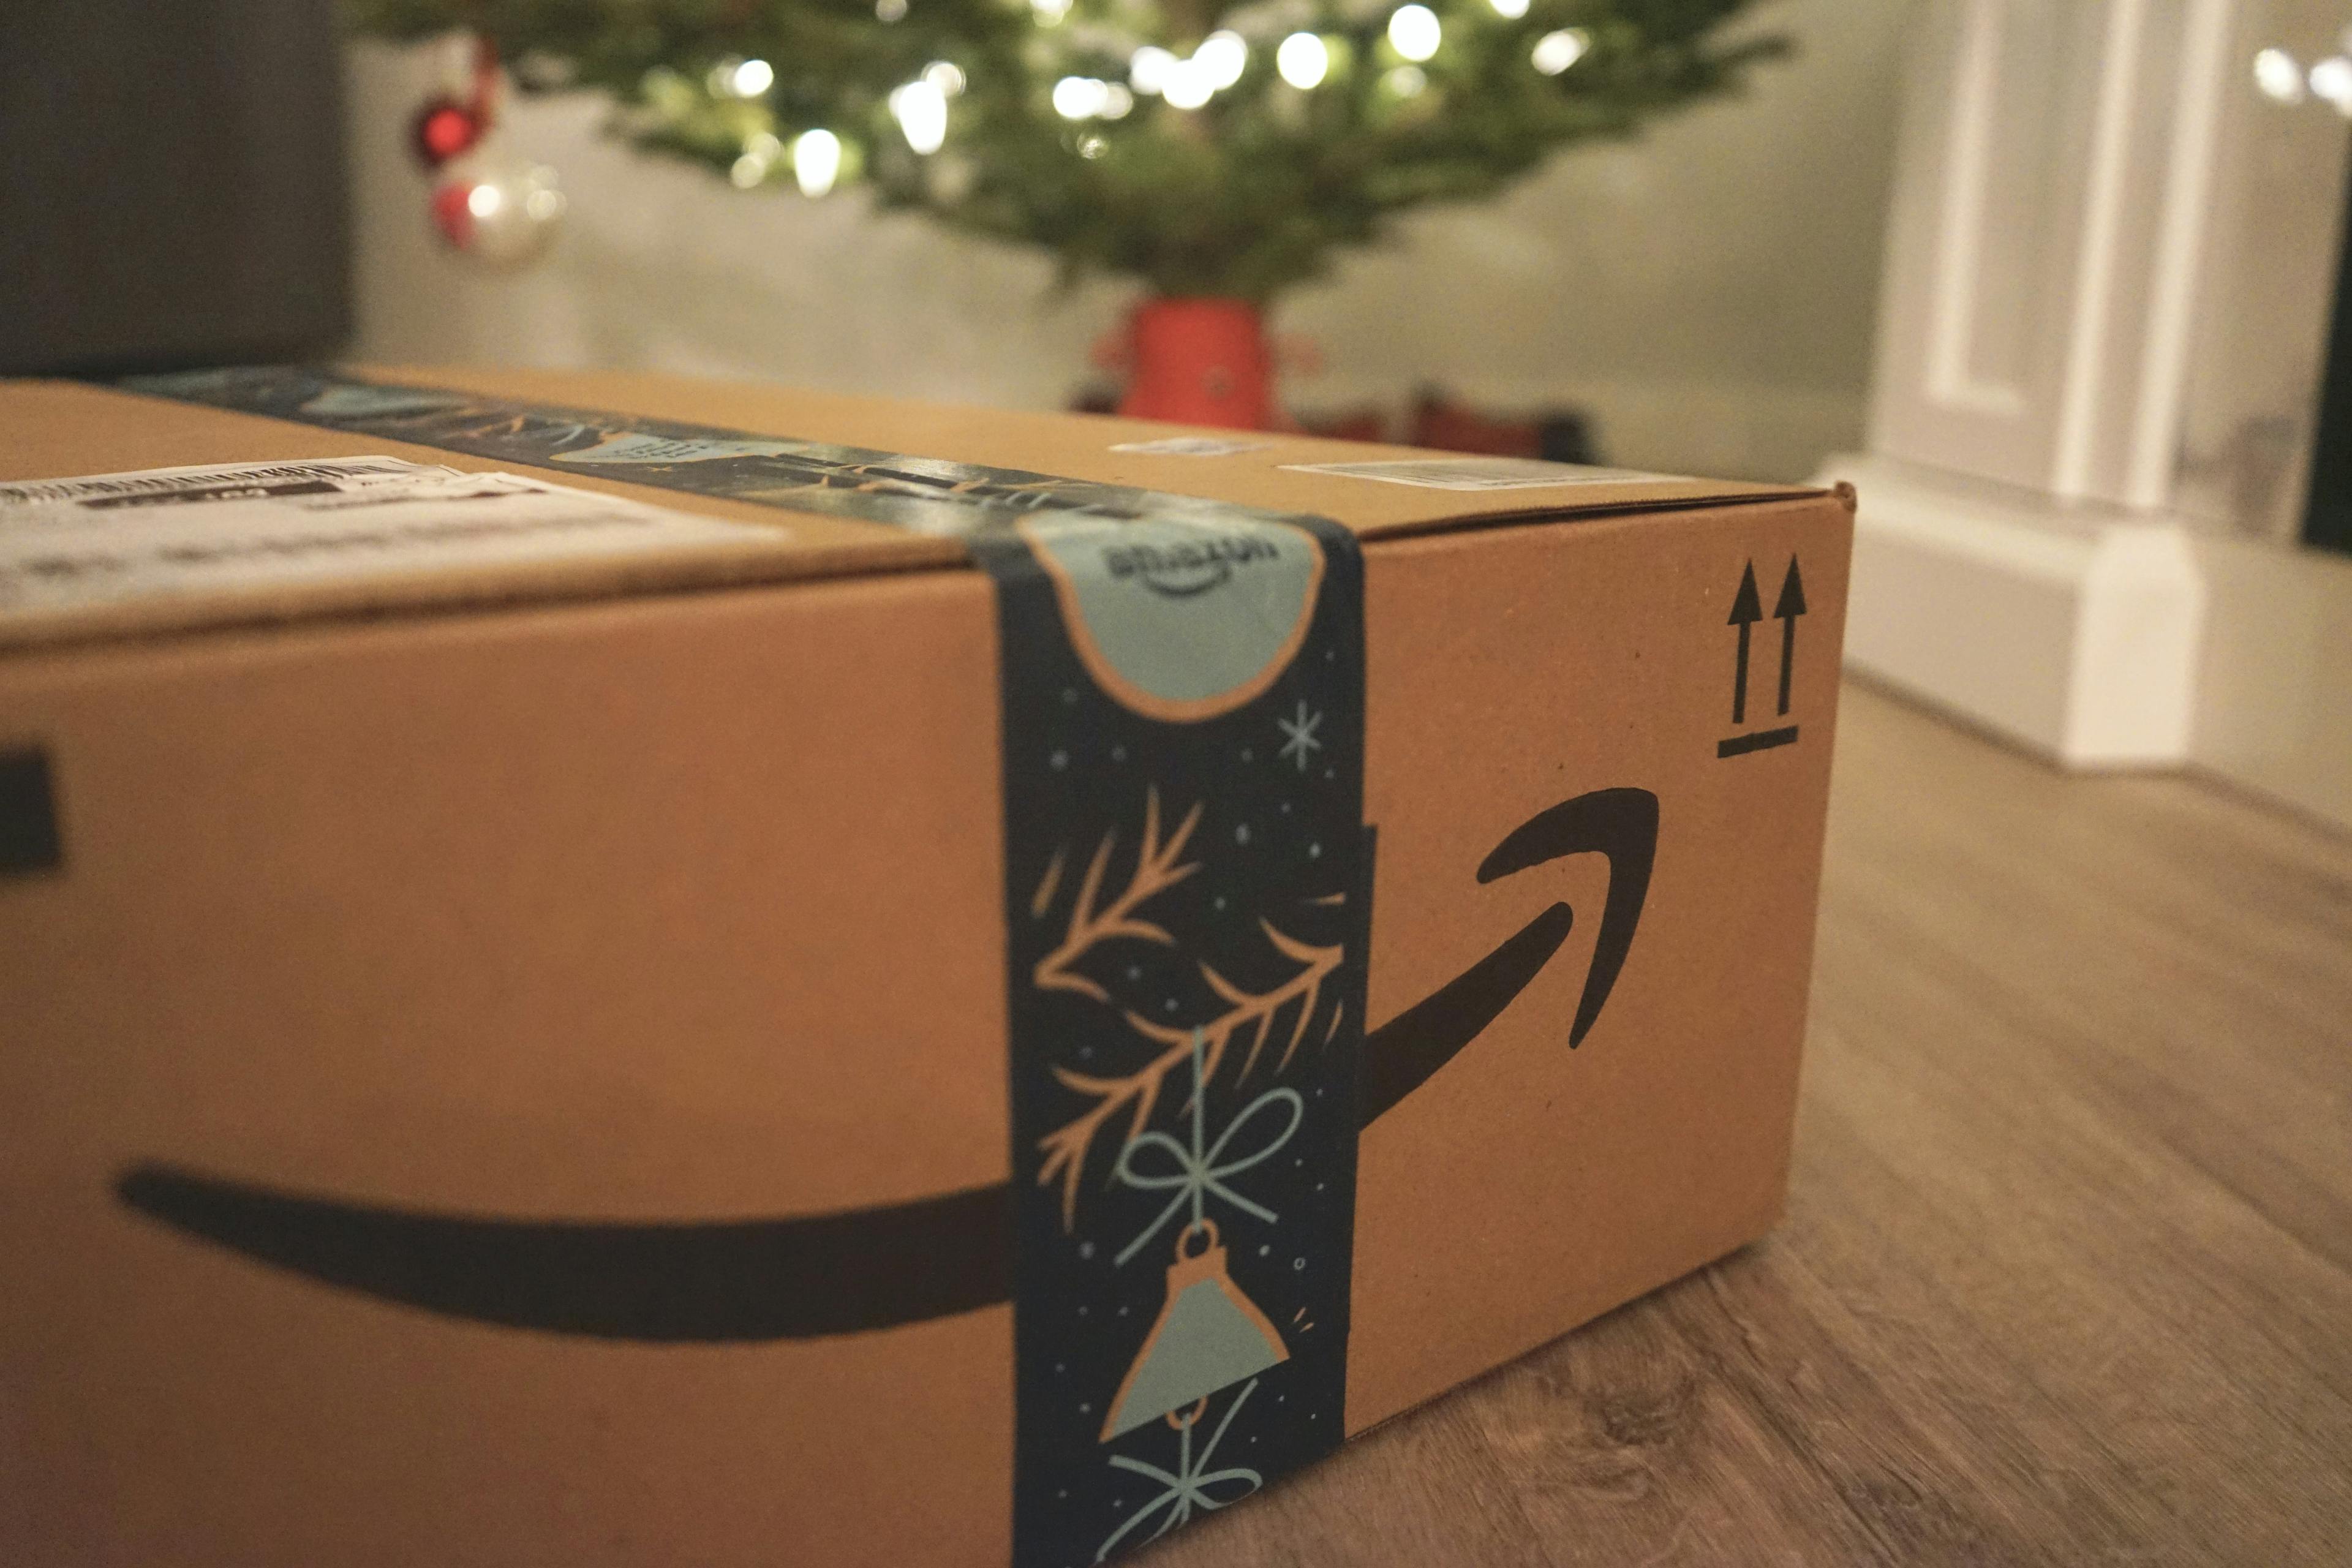 Amazon Kicks Off the Holidays with Exclusive Two-Day Prime Shopping Event